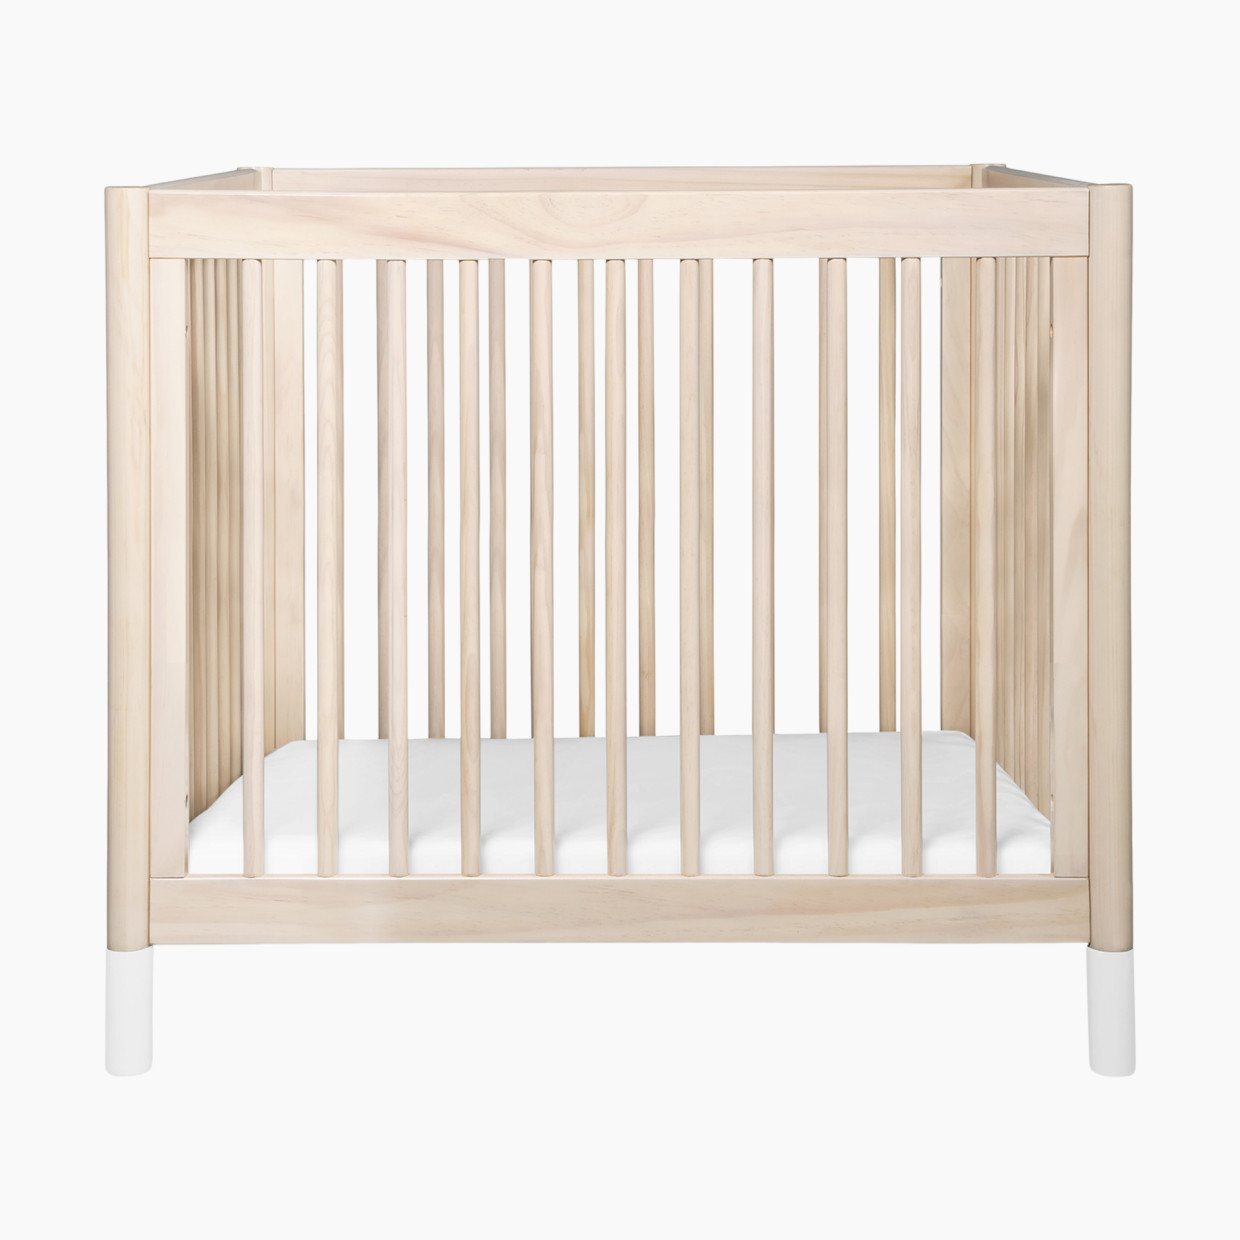 babyletto Gelato 4-in-1 Convertible Mini Crib - Washed Natural Finish With White Feet.